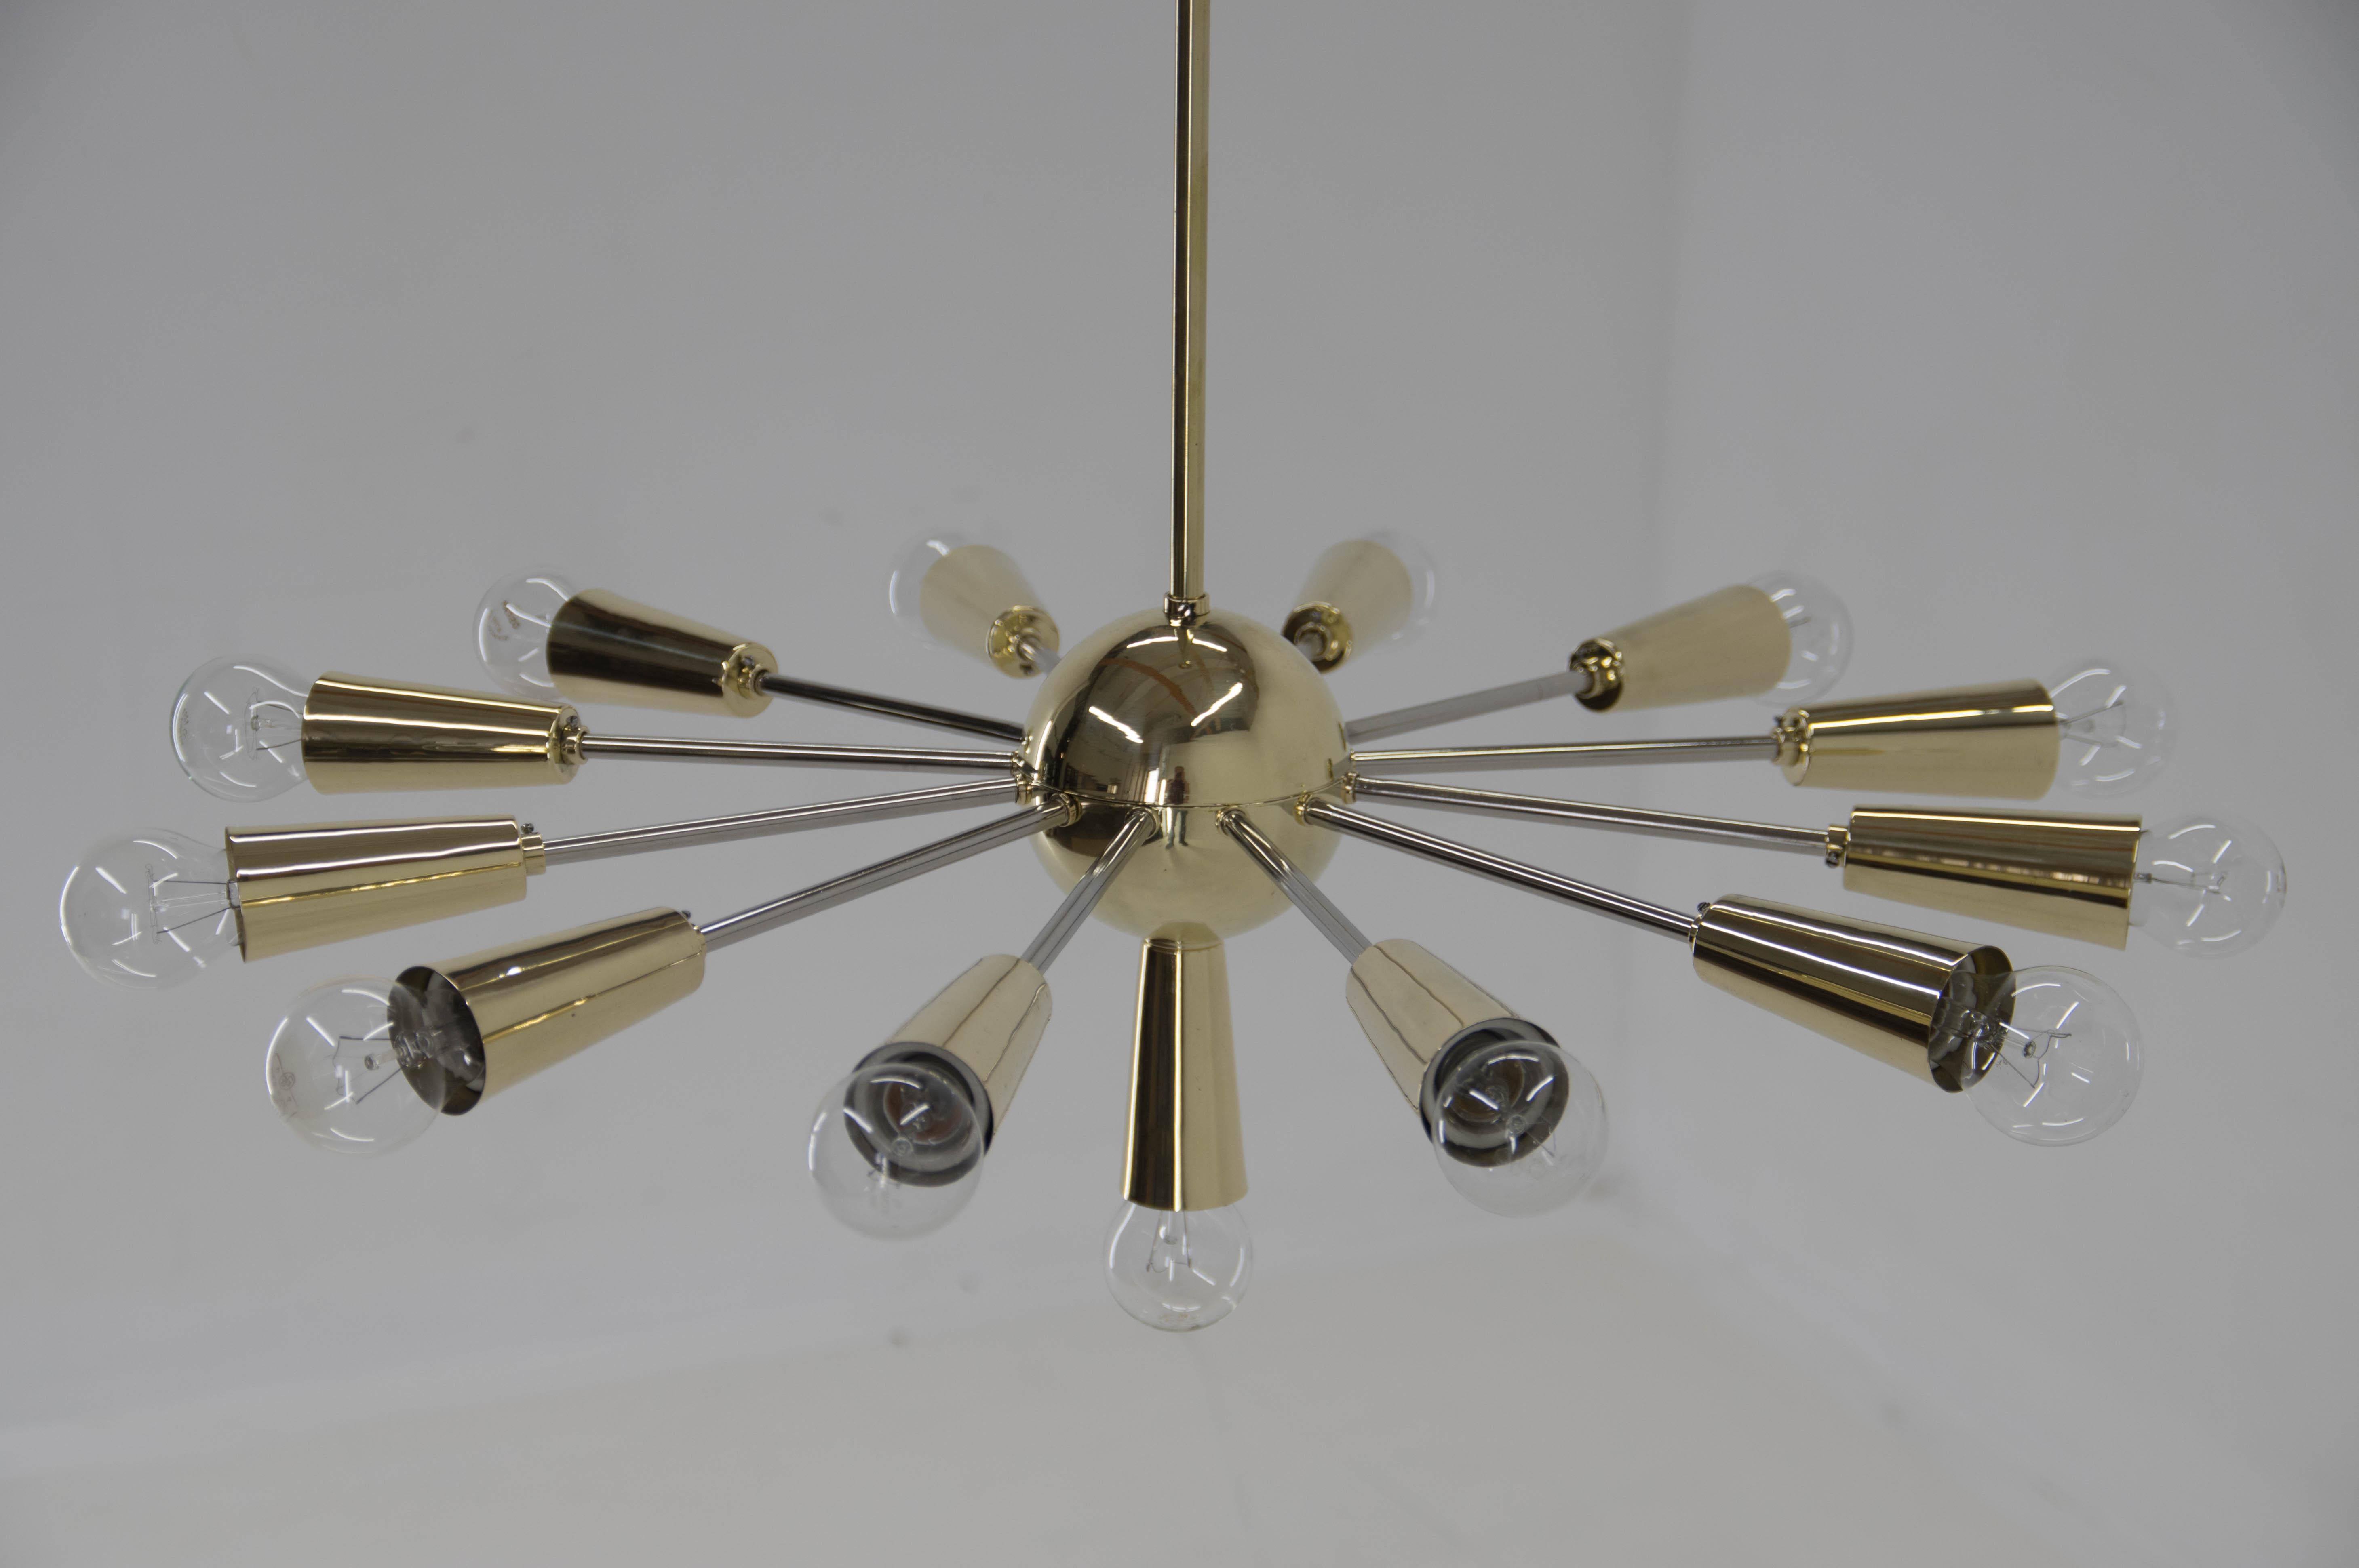 Rare Mid-Century big Sputnik style chandelier.
Made in Czechoslovakia in 1960s.
Cleaned, polished, rewired:
13x40W, E25-E27 bulbs
Excellent condition
US wiring compatible.